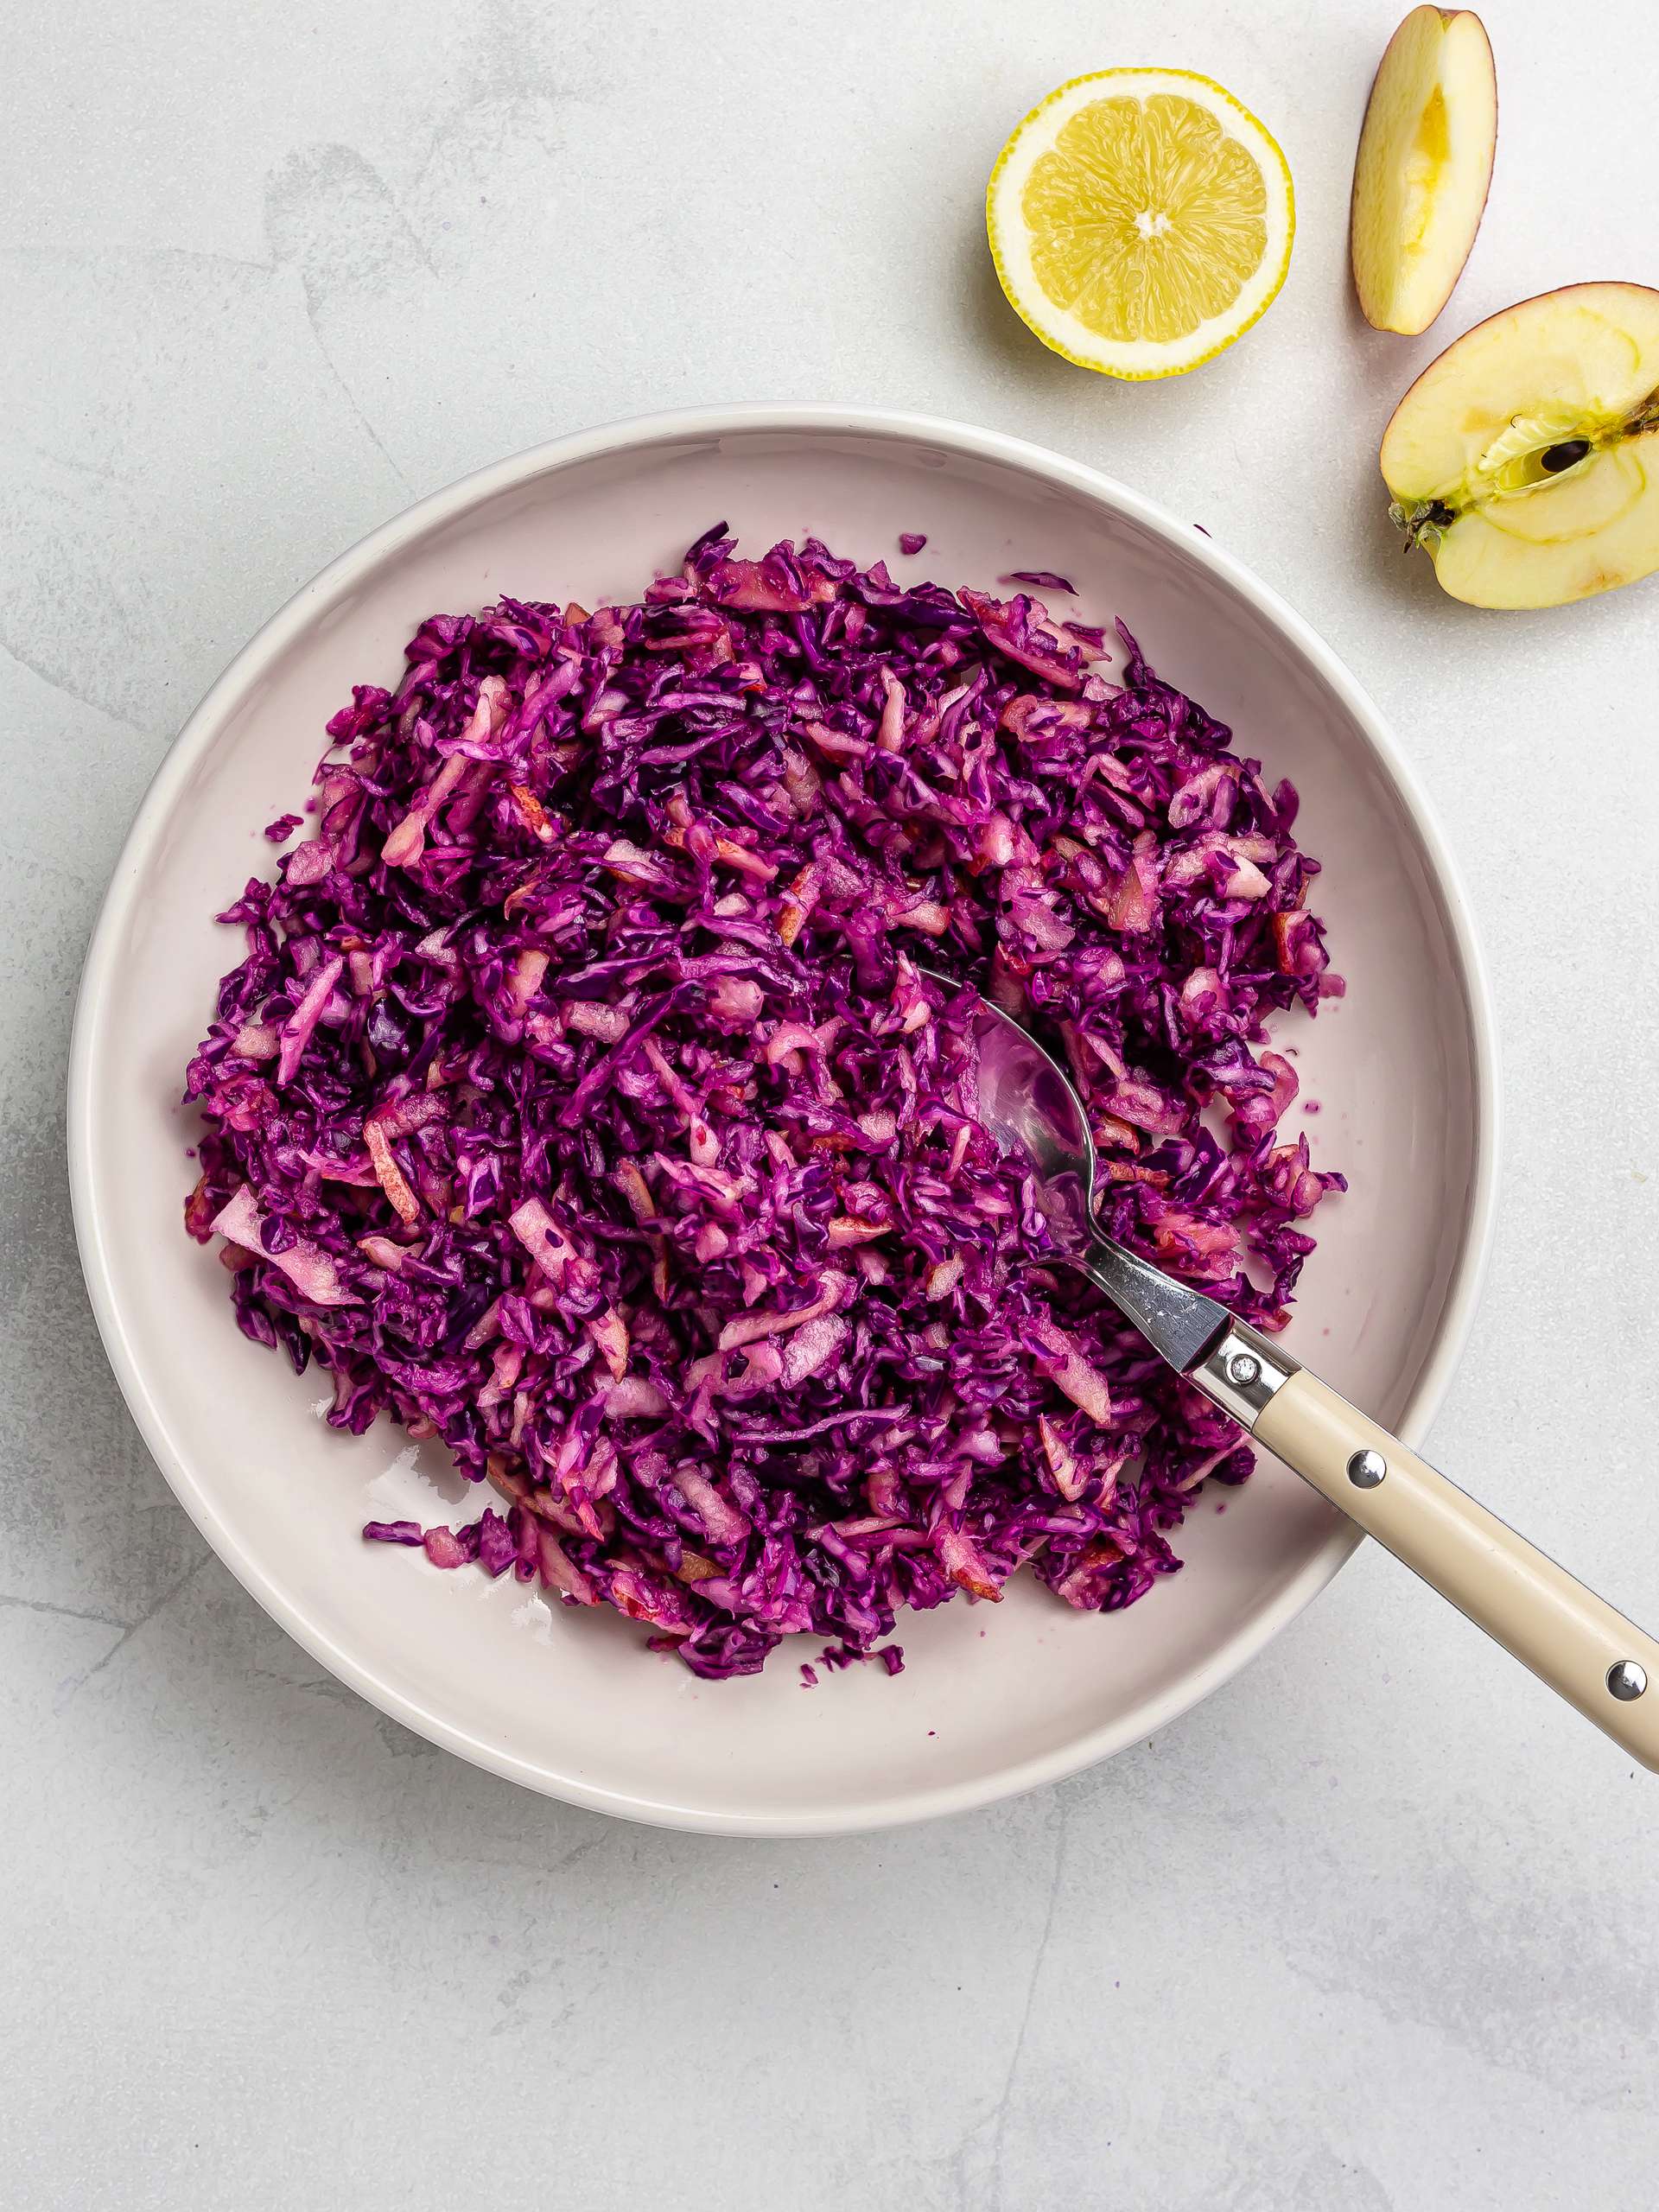 shredded red cabbage with grated apple and lemon